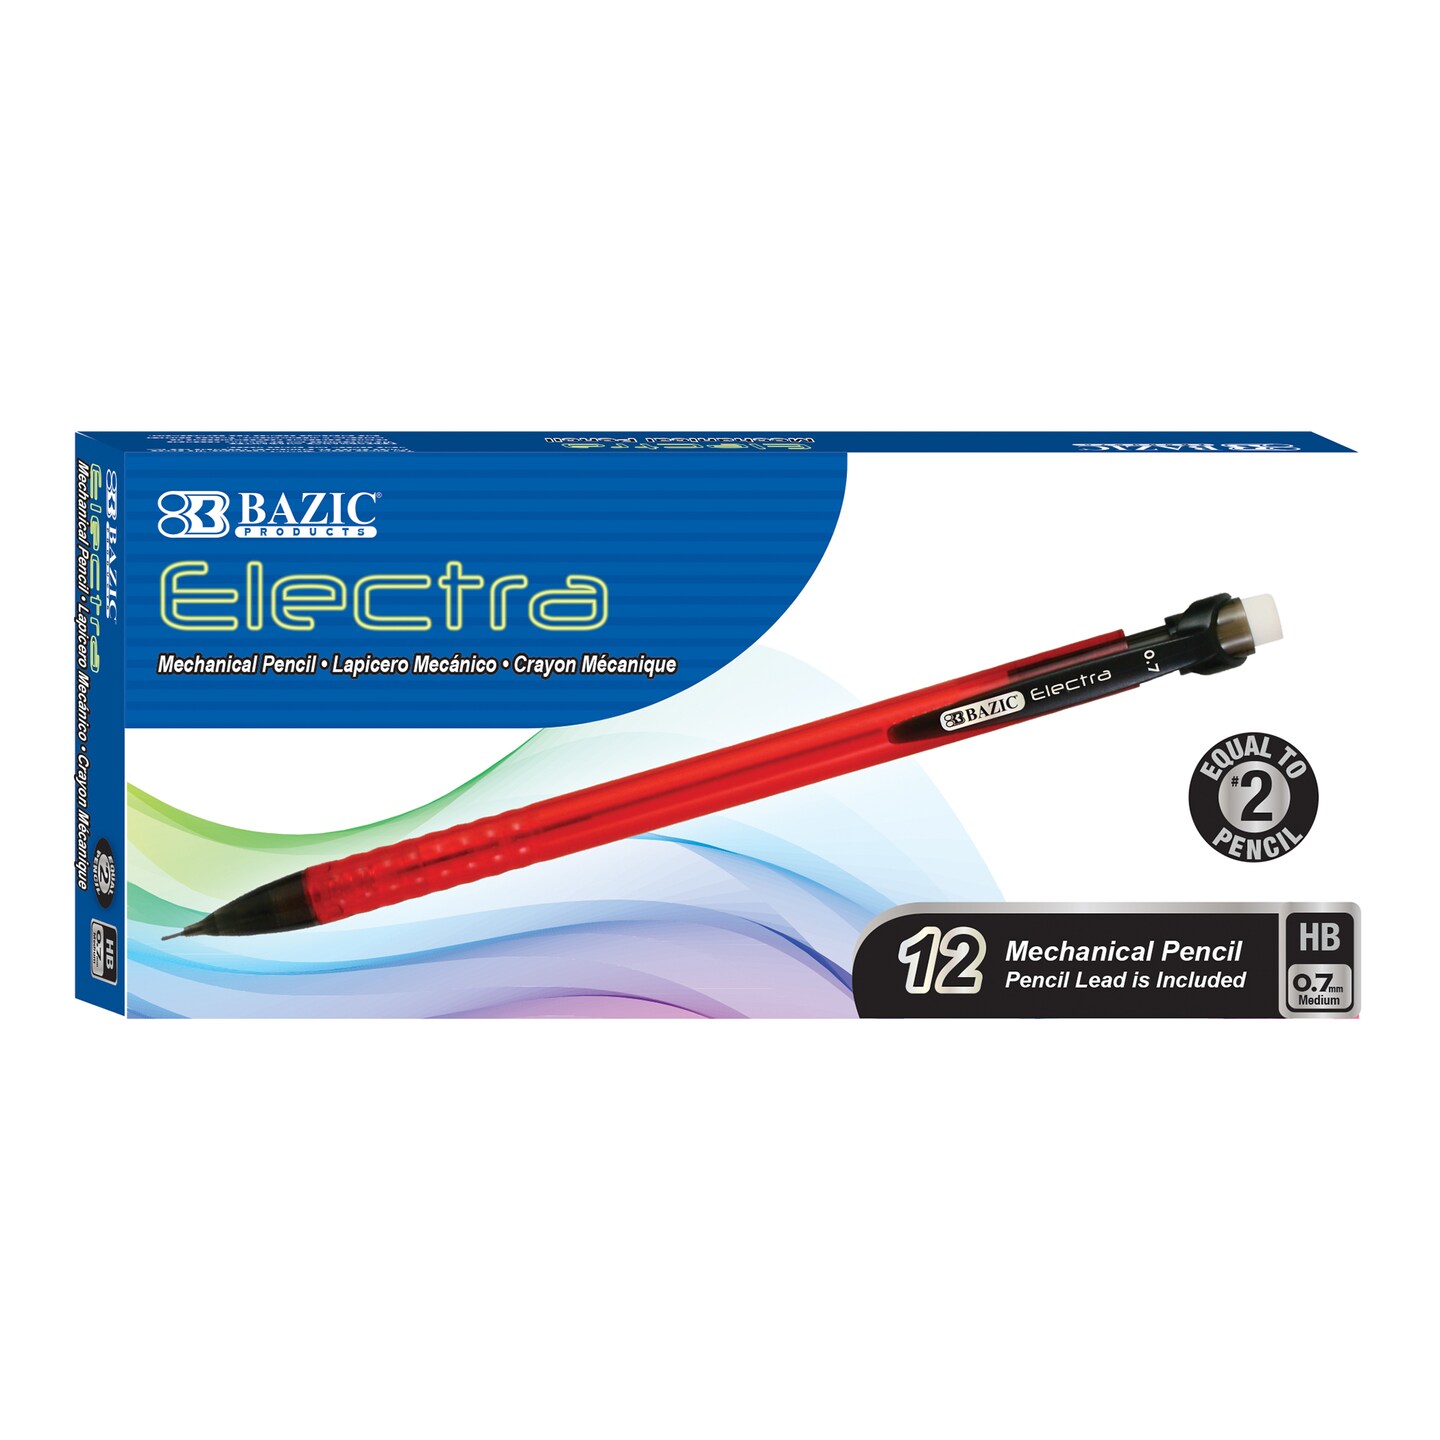 BAZIC 0.7 mm Electra Mechanical Pencil (12/Pack)